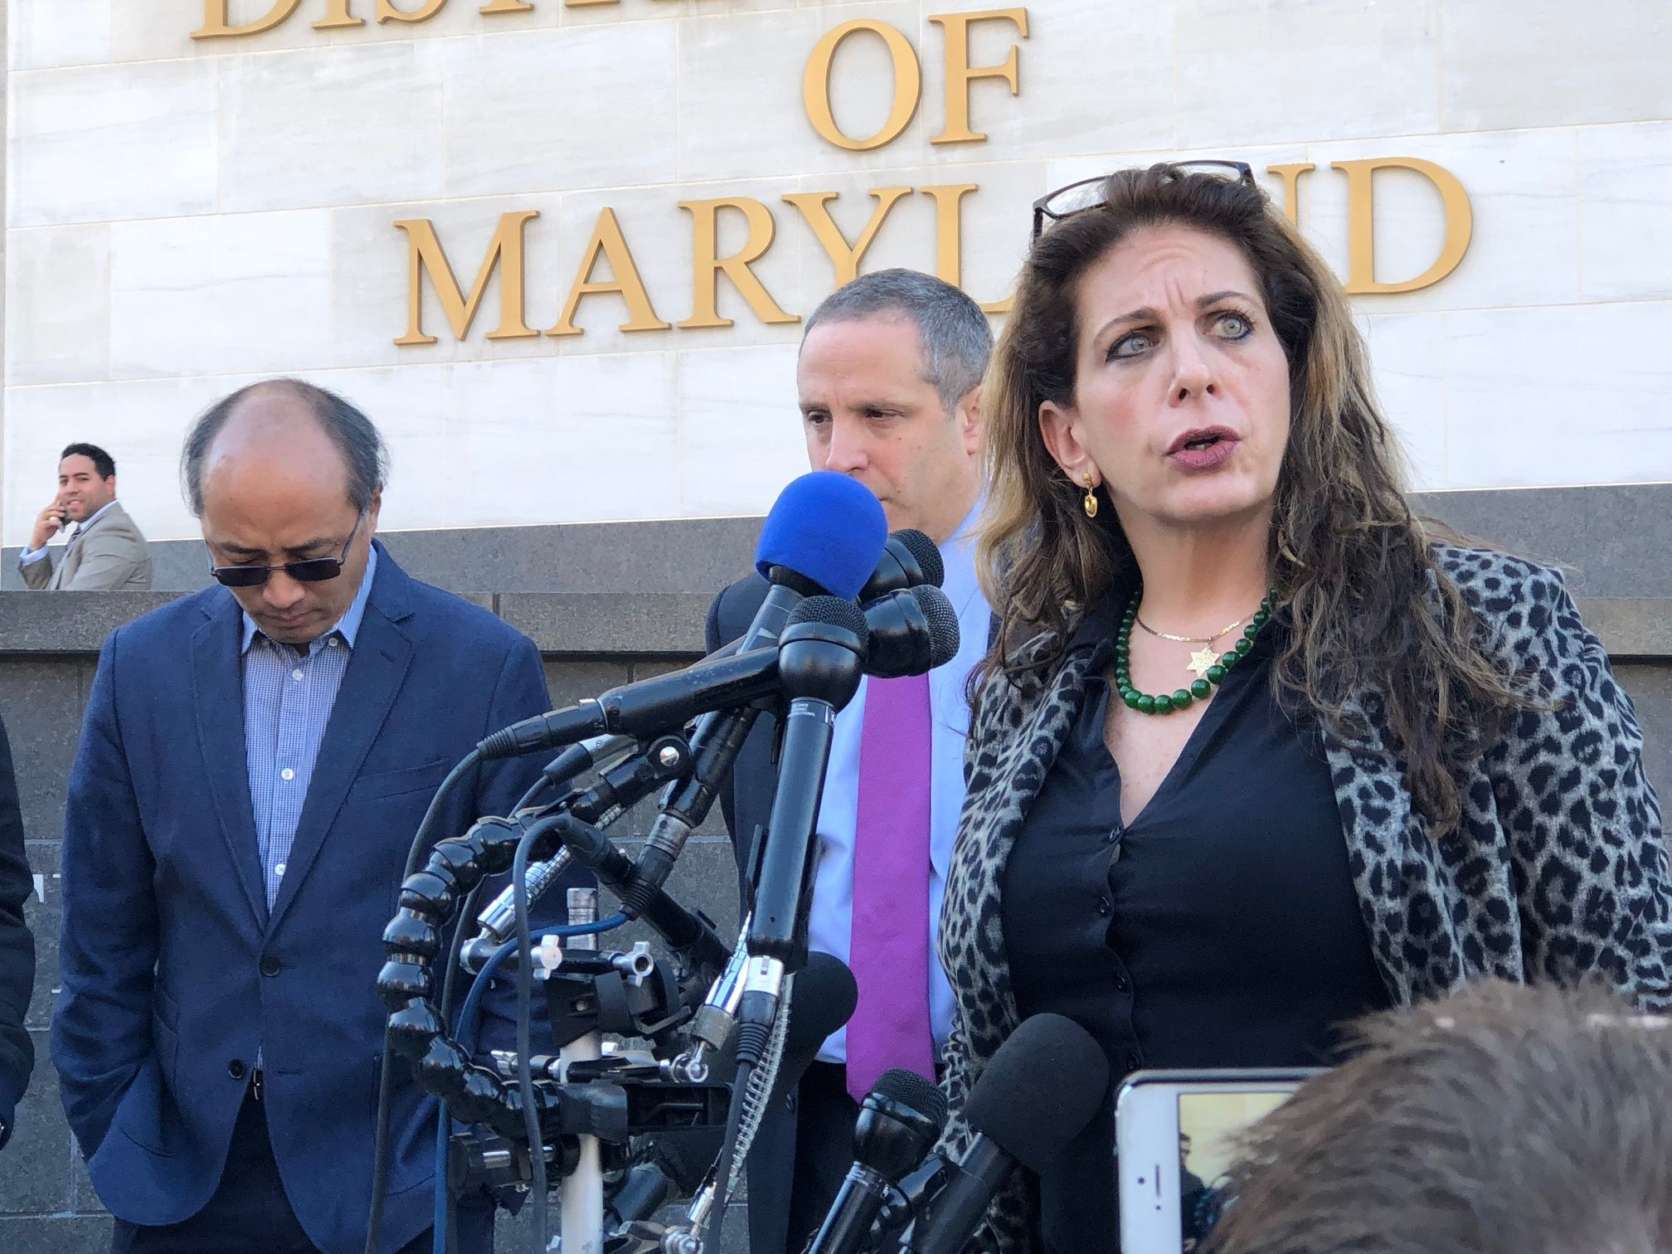 Jill Michaels, a defense attorney for Alwin Chen, speaks with the media after the hearing Tuesday. (WTOP/Megan Cloherty)